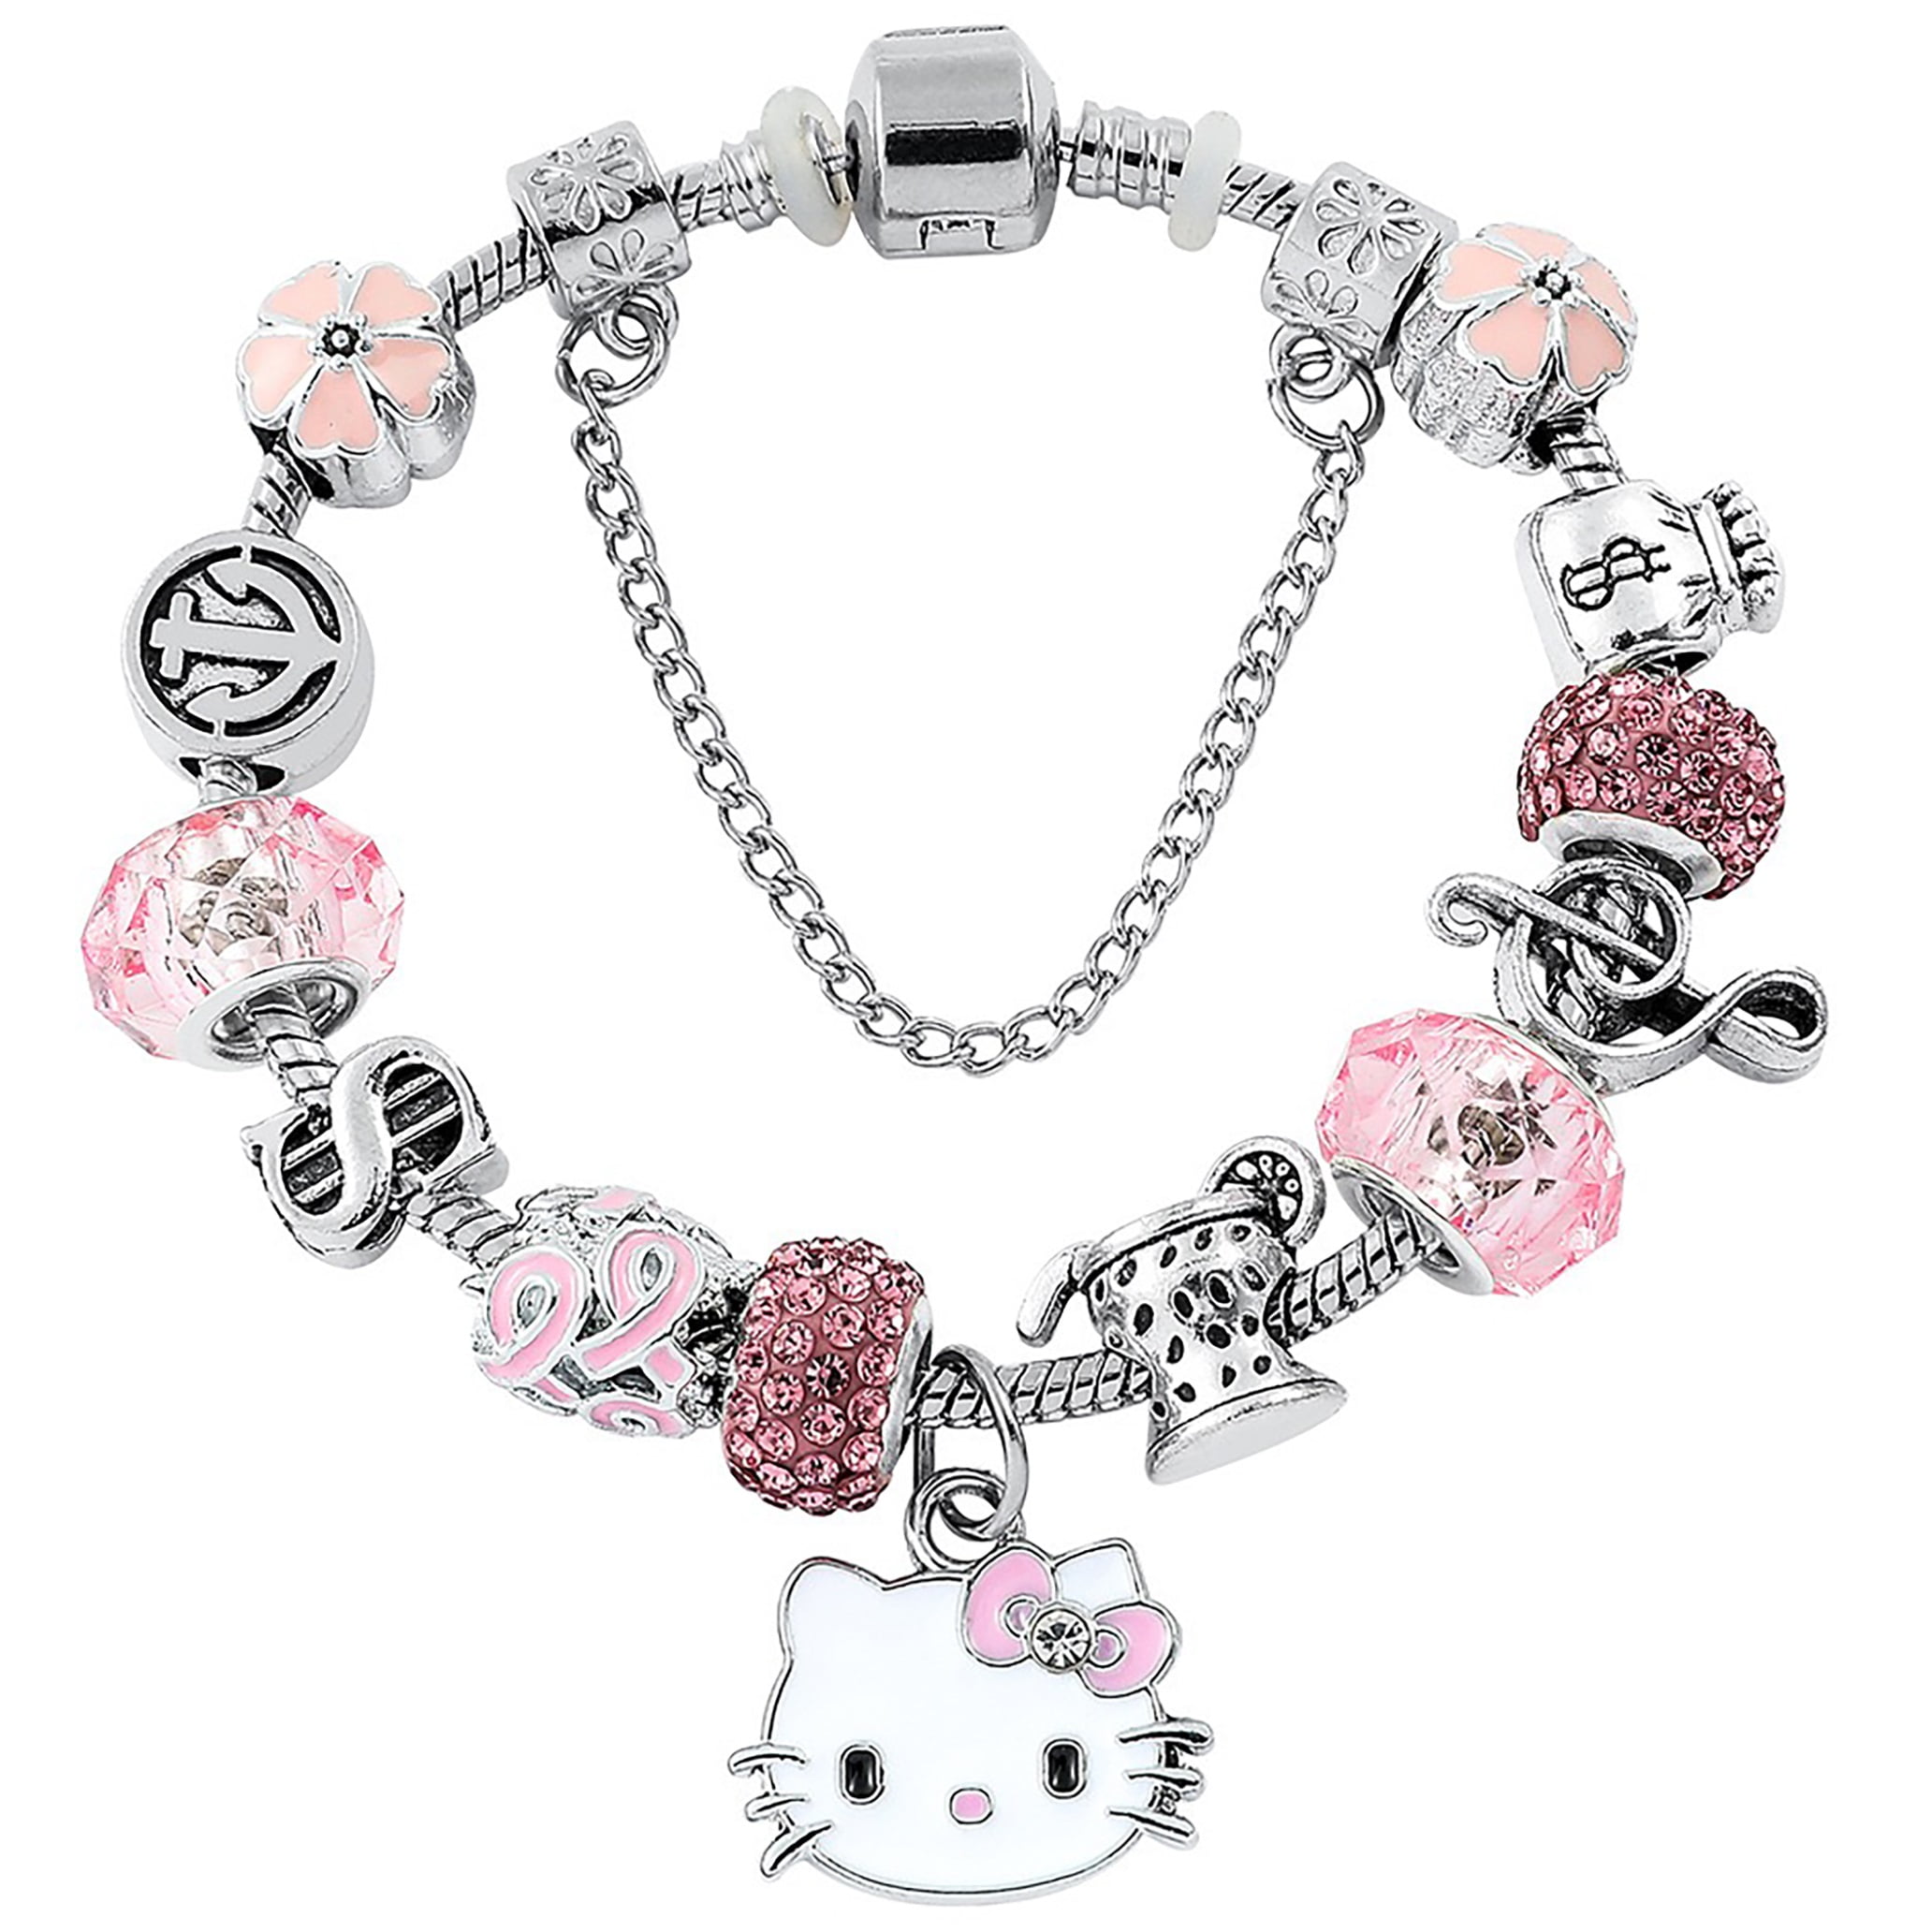 VINCHIC Hello Kitty Bracelet Chain Cuff Jewelry Charms for